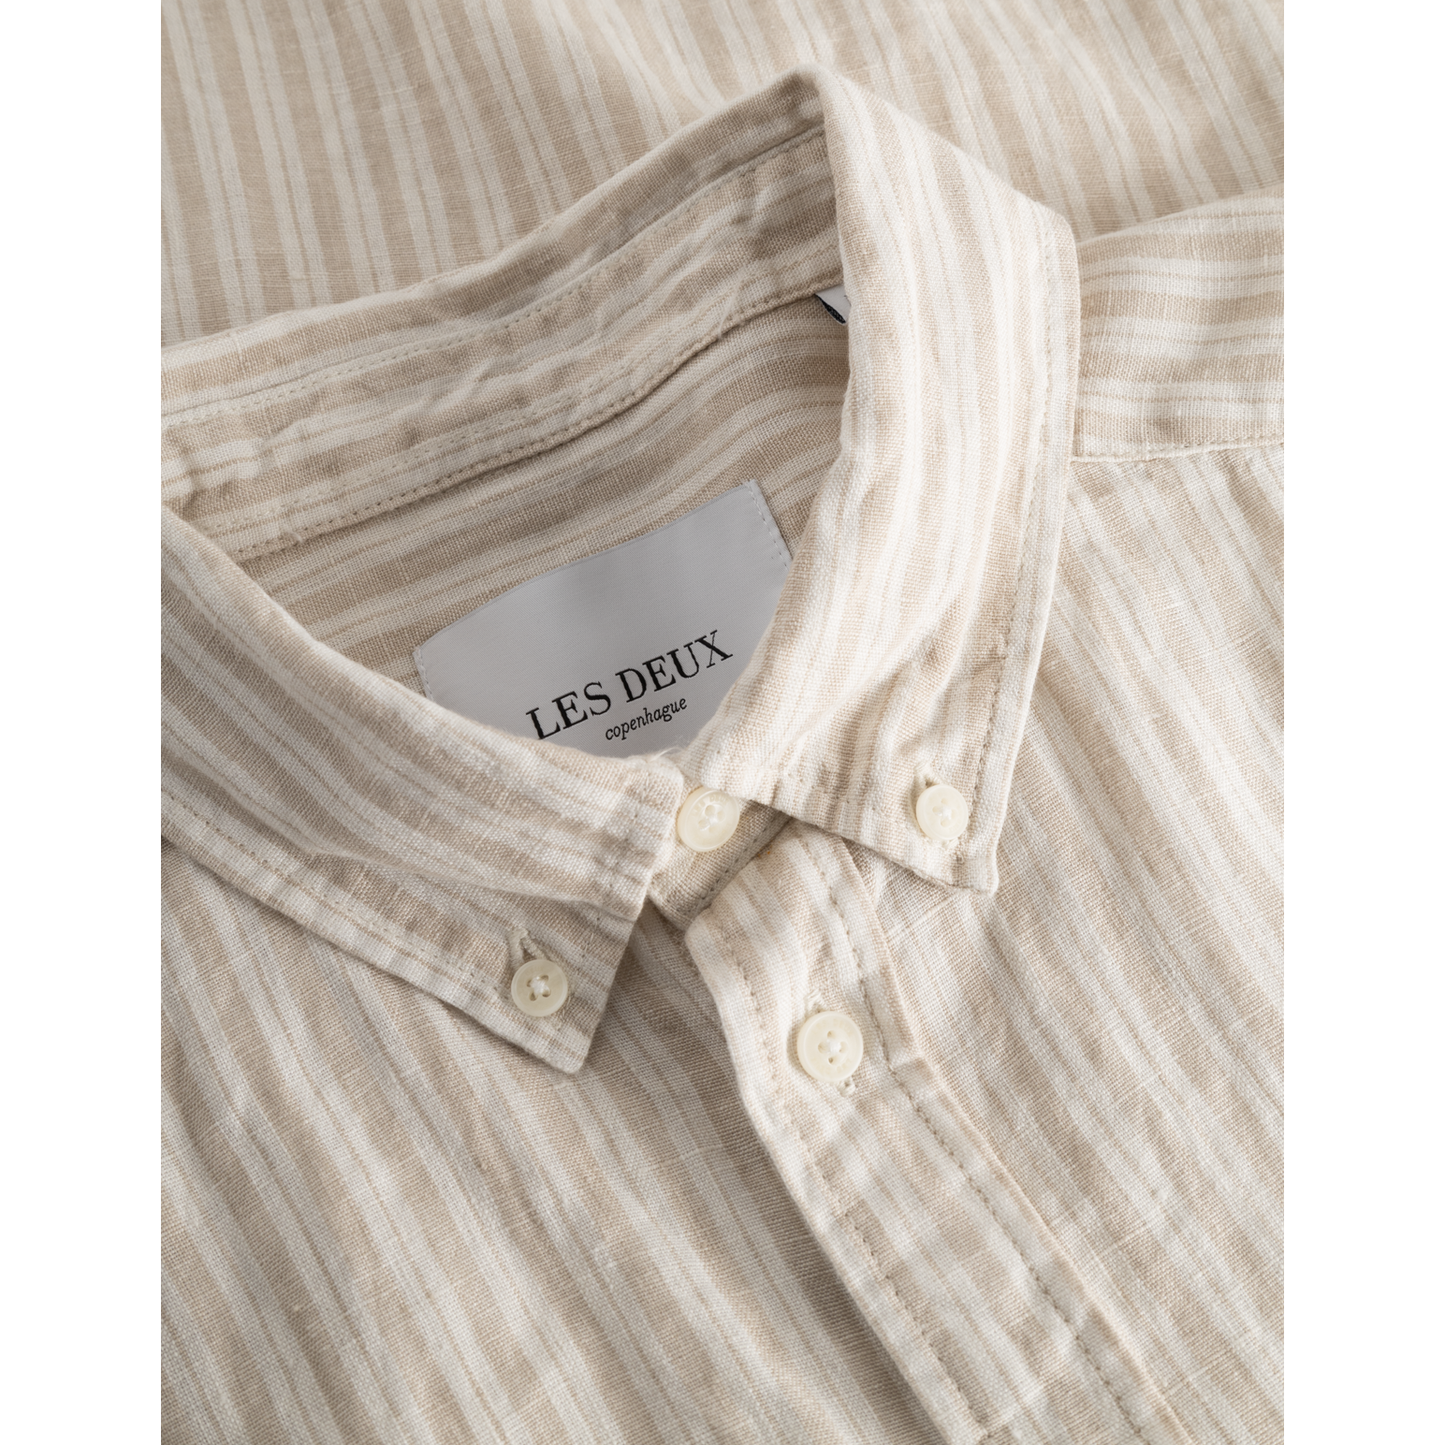 Close-up of a Kris Linen SS Shirt in Light Desert Sand/Light Ivory with a button-down collar showing the brand label "Les Deux".